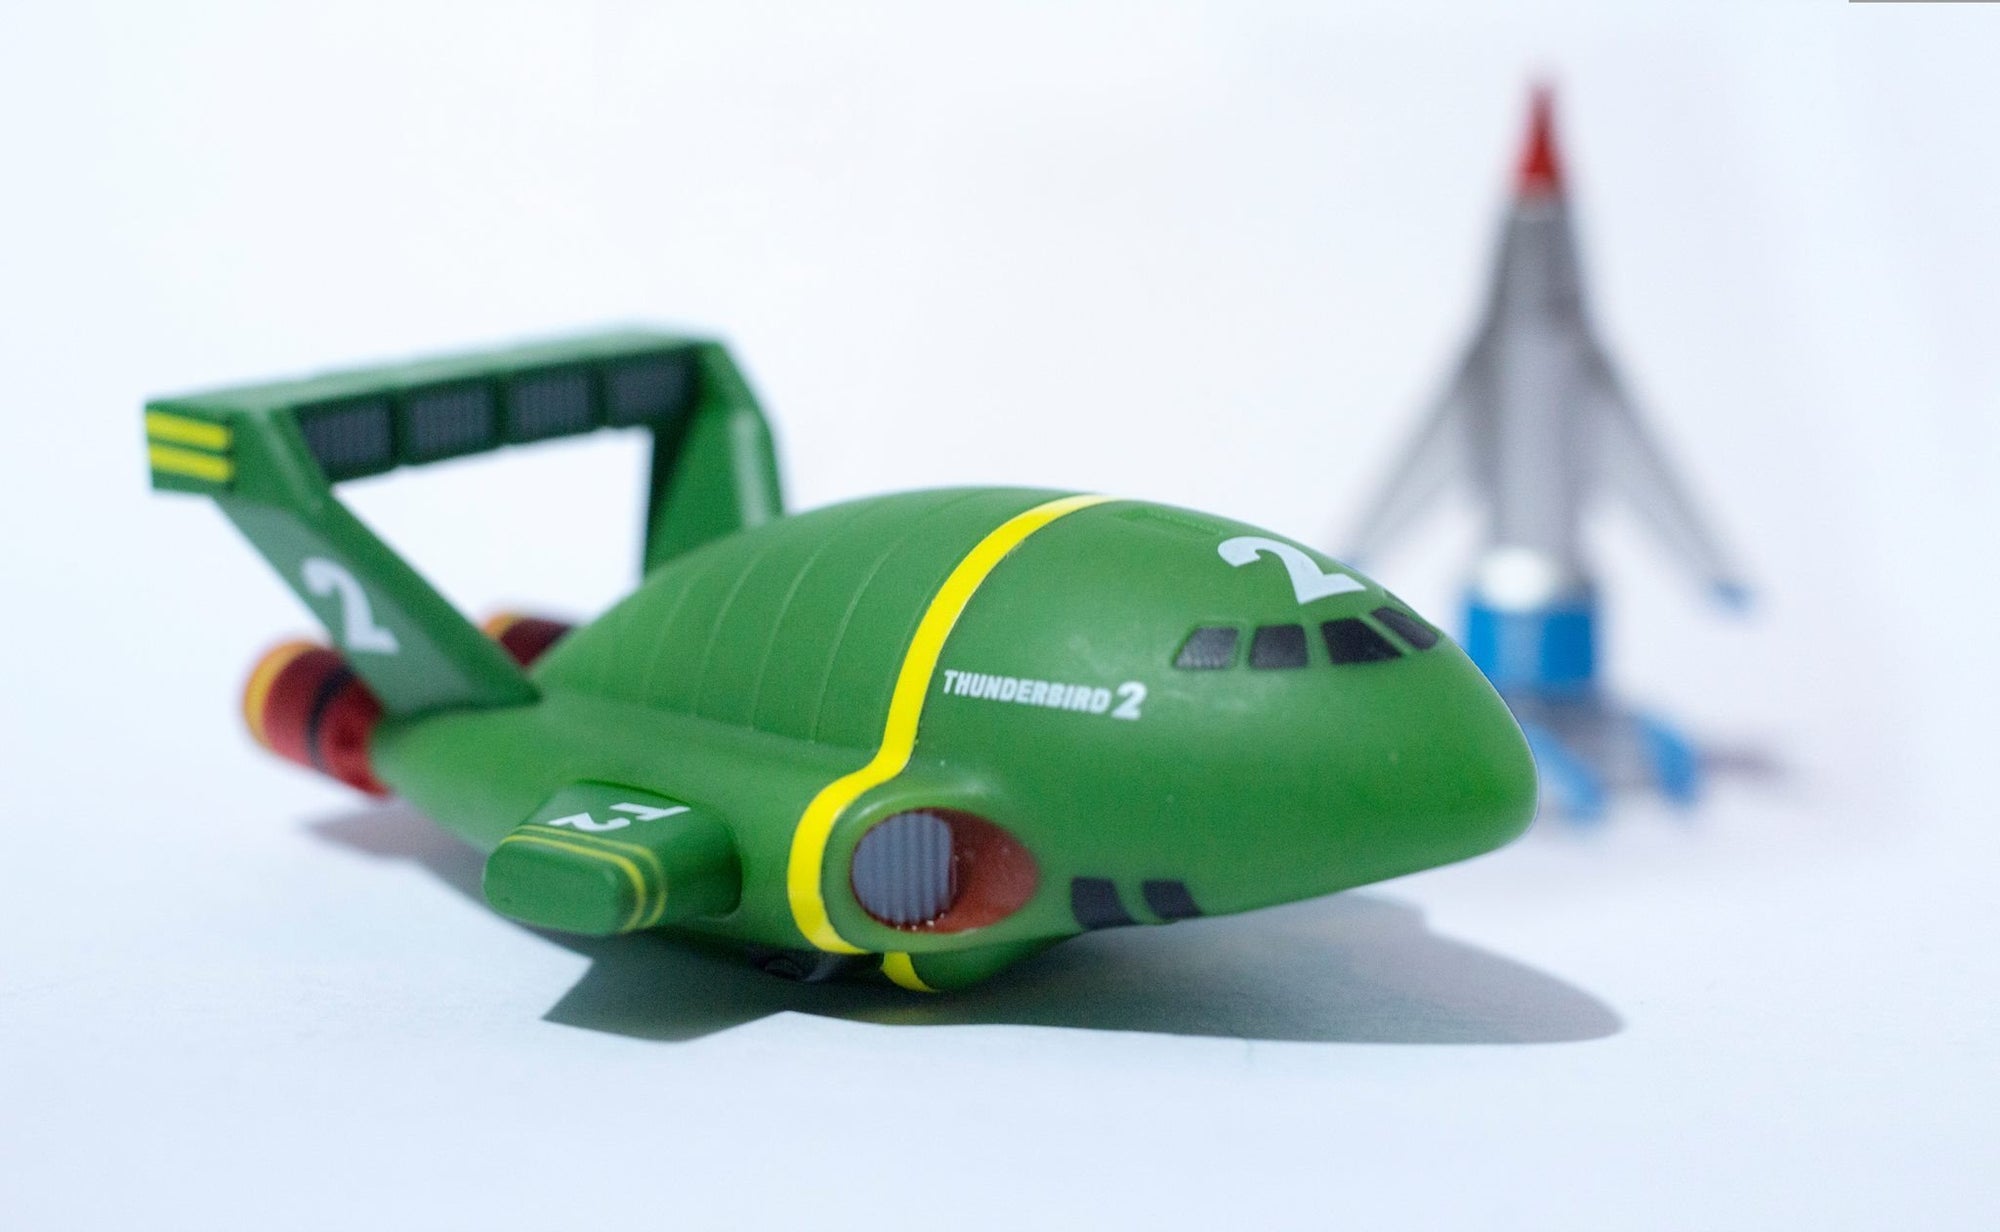 Thunderbird 1 and Thunderbird 2 Titans - The Gerry Anderson Store